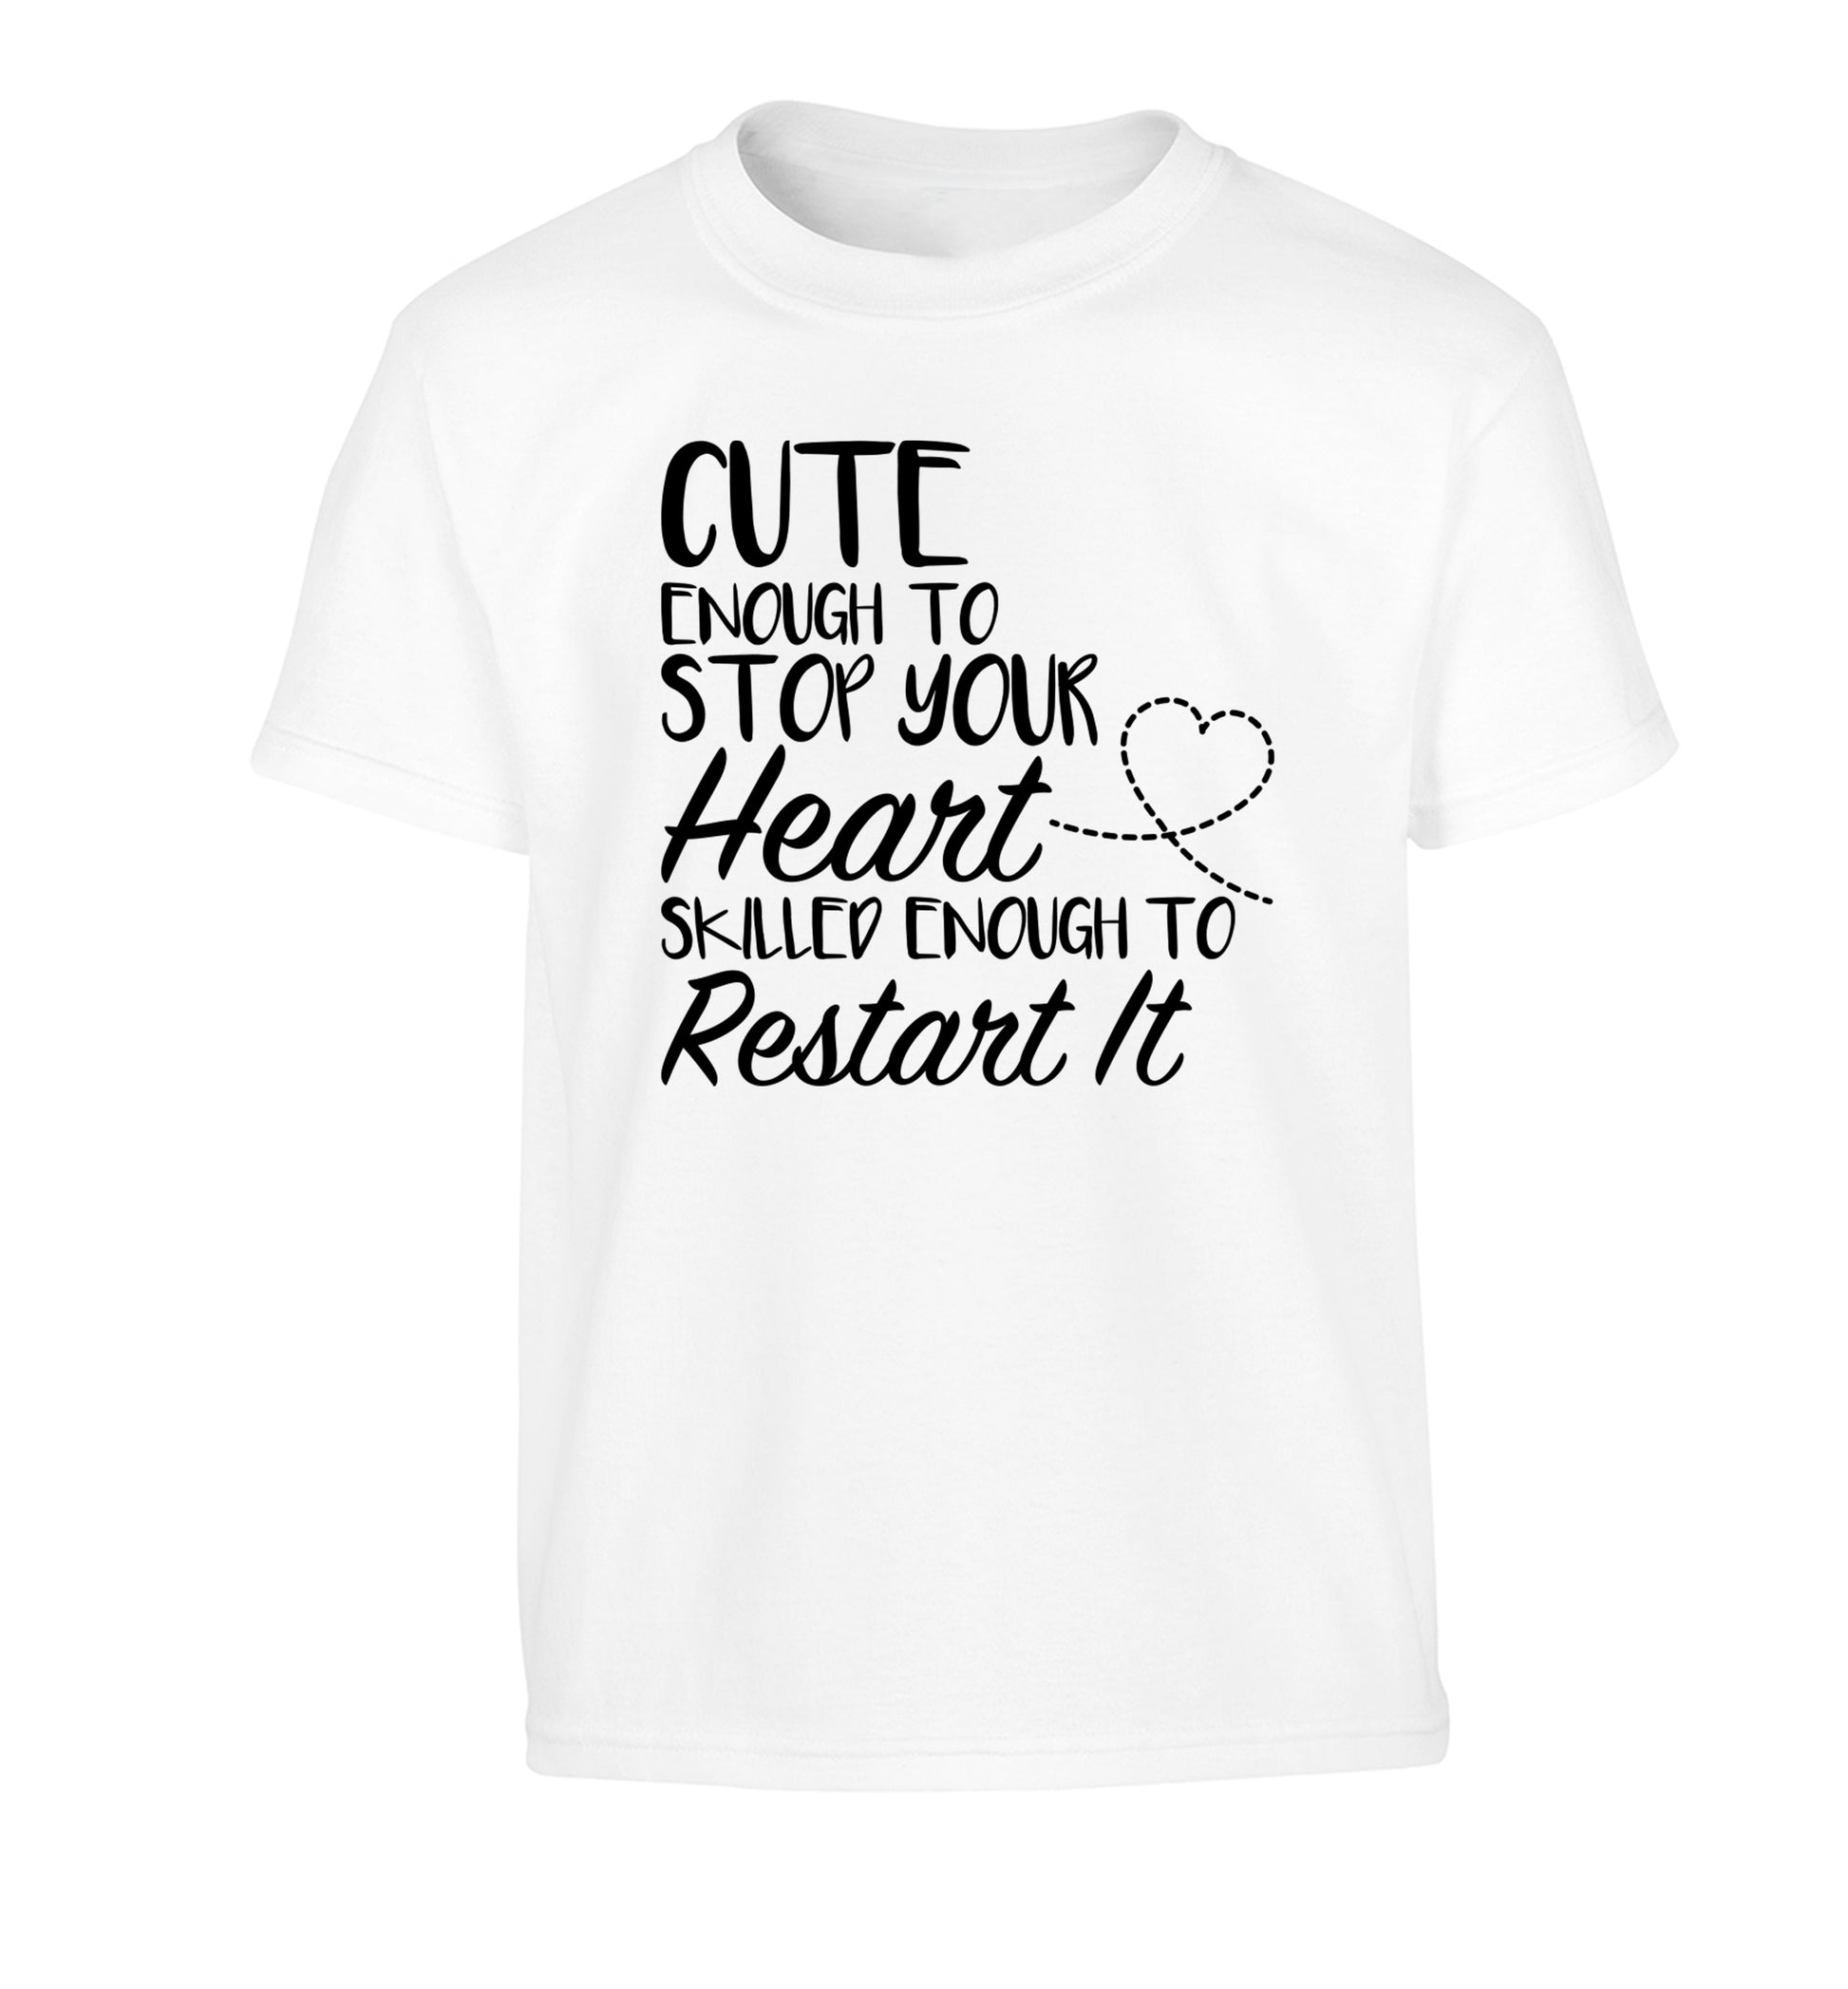 Cute enough to stop your heart skilled enough to restart it Children's white Tshirt 12-13 Years